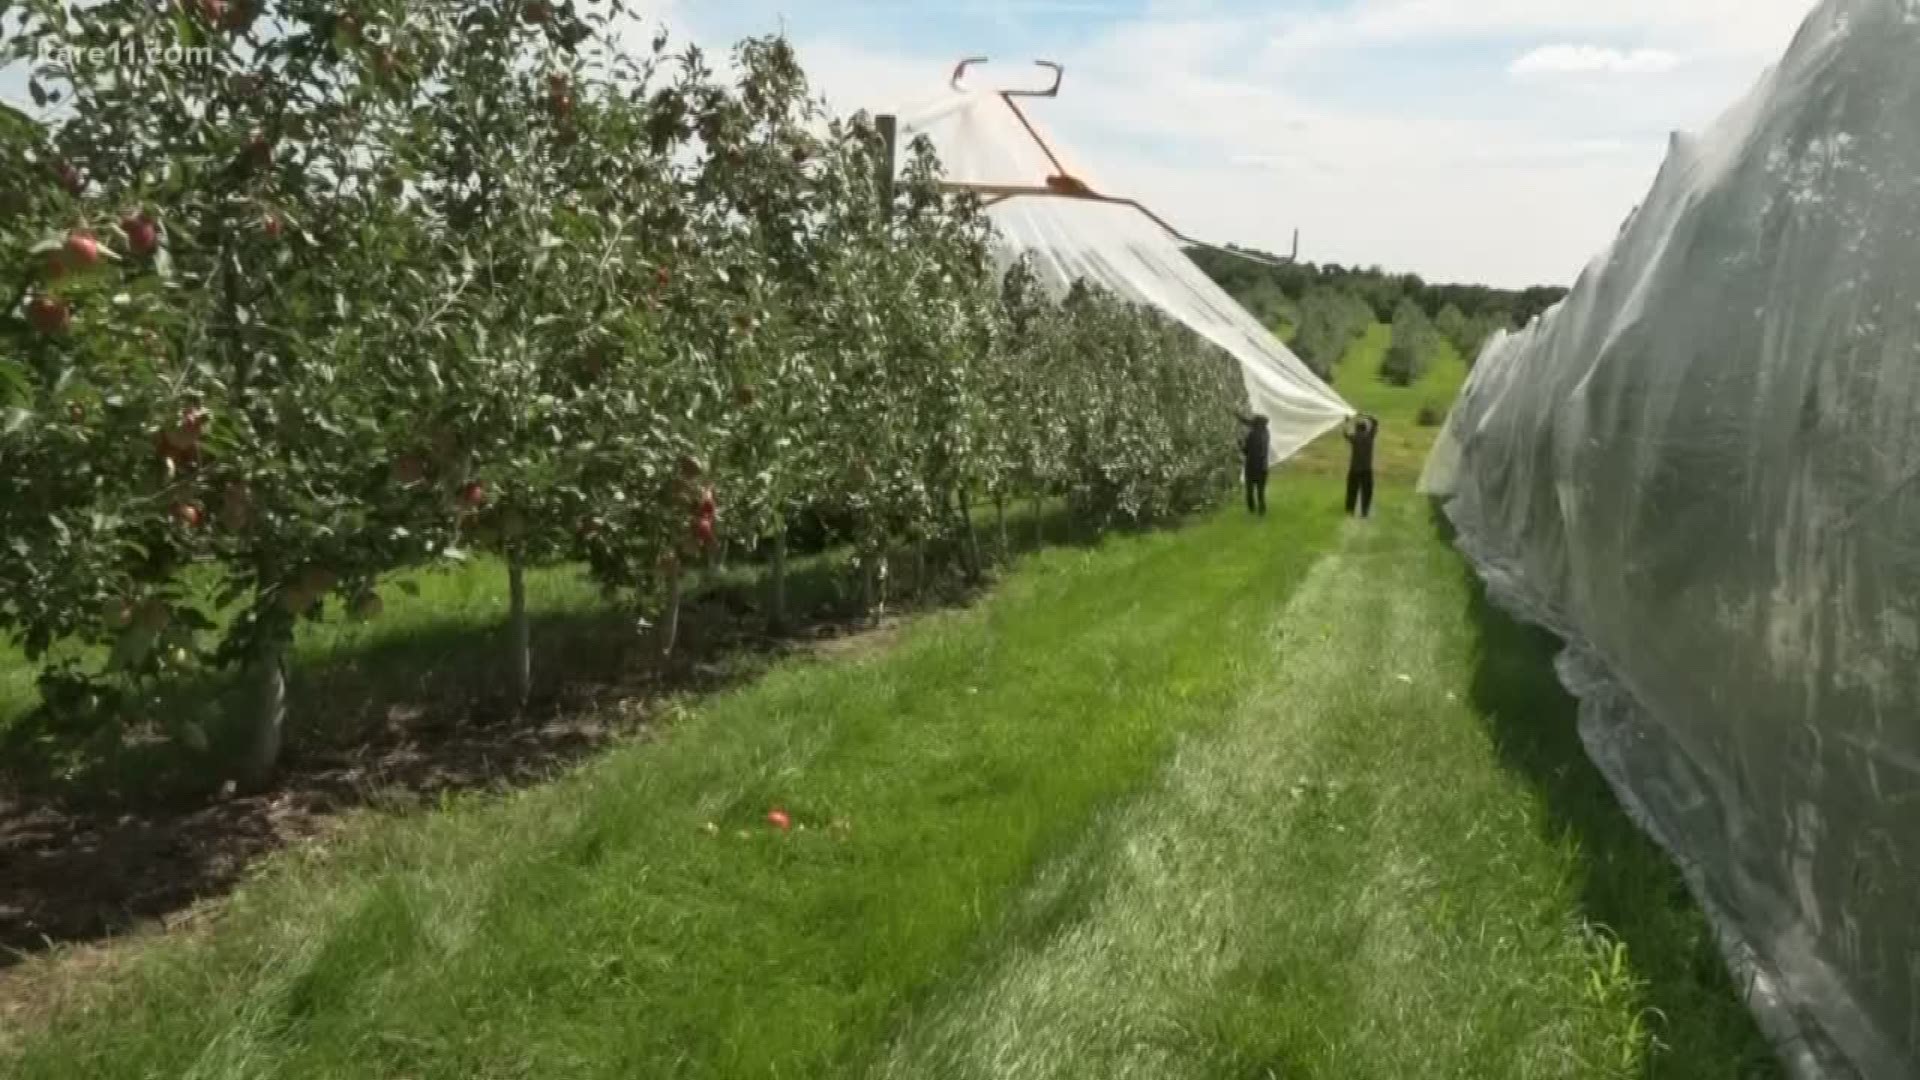 Here's how orchards protect their apples from bugs and hail while still allowing UV light to come in.